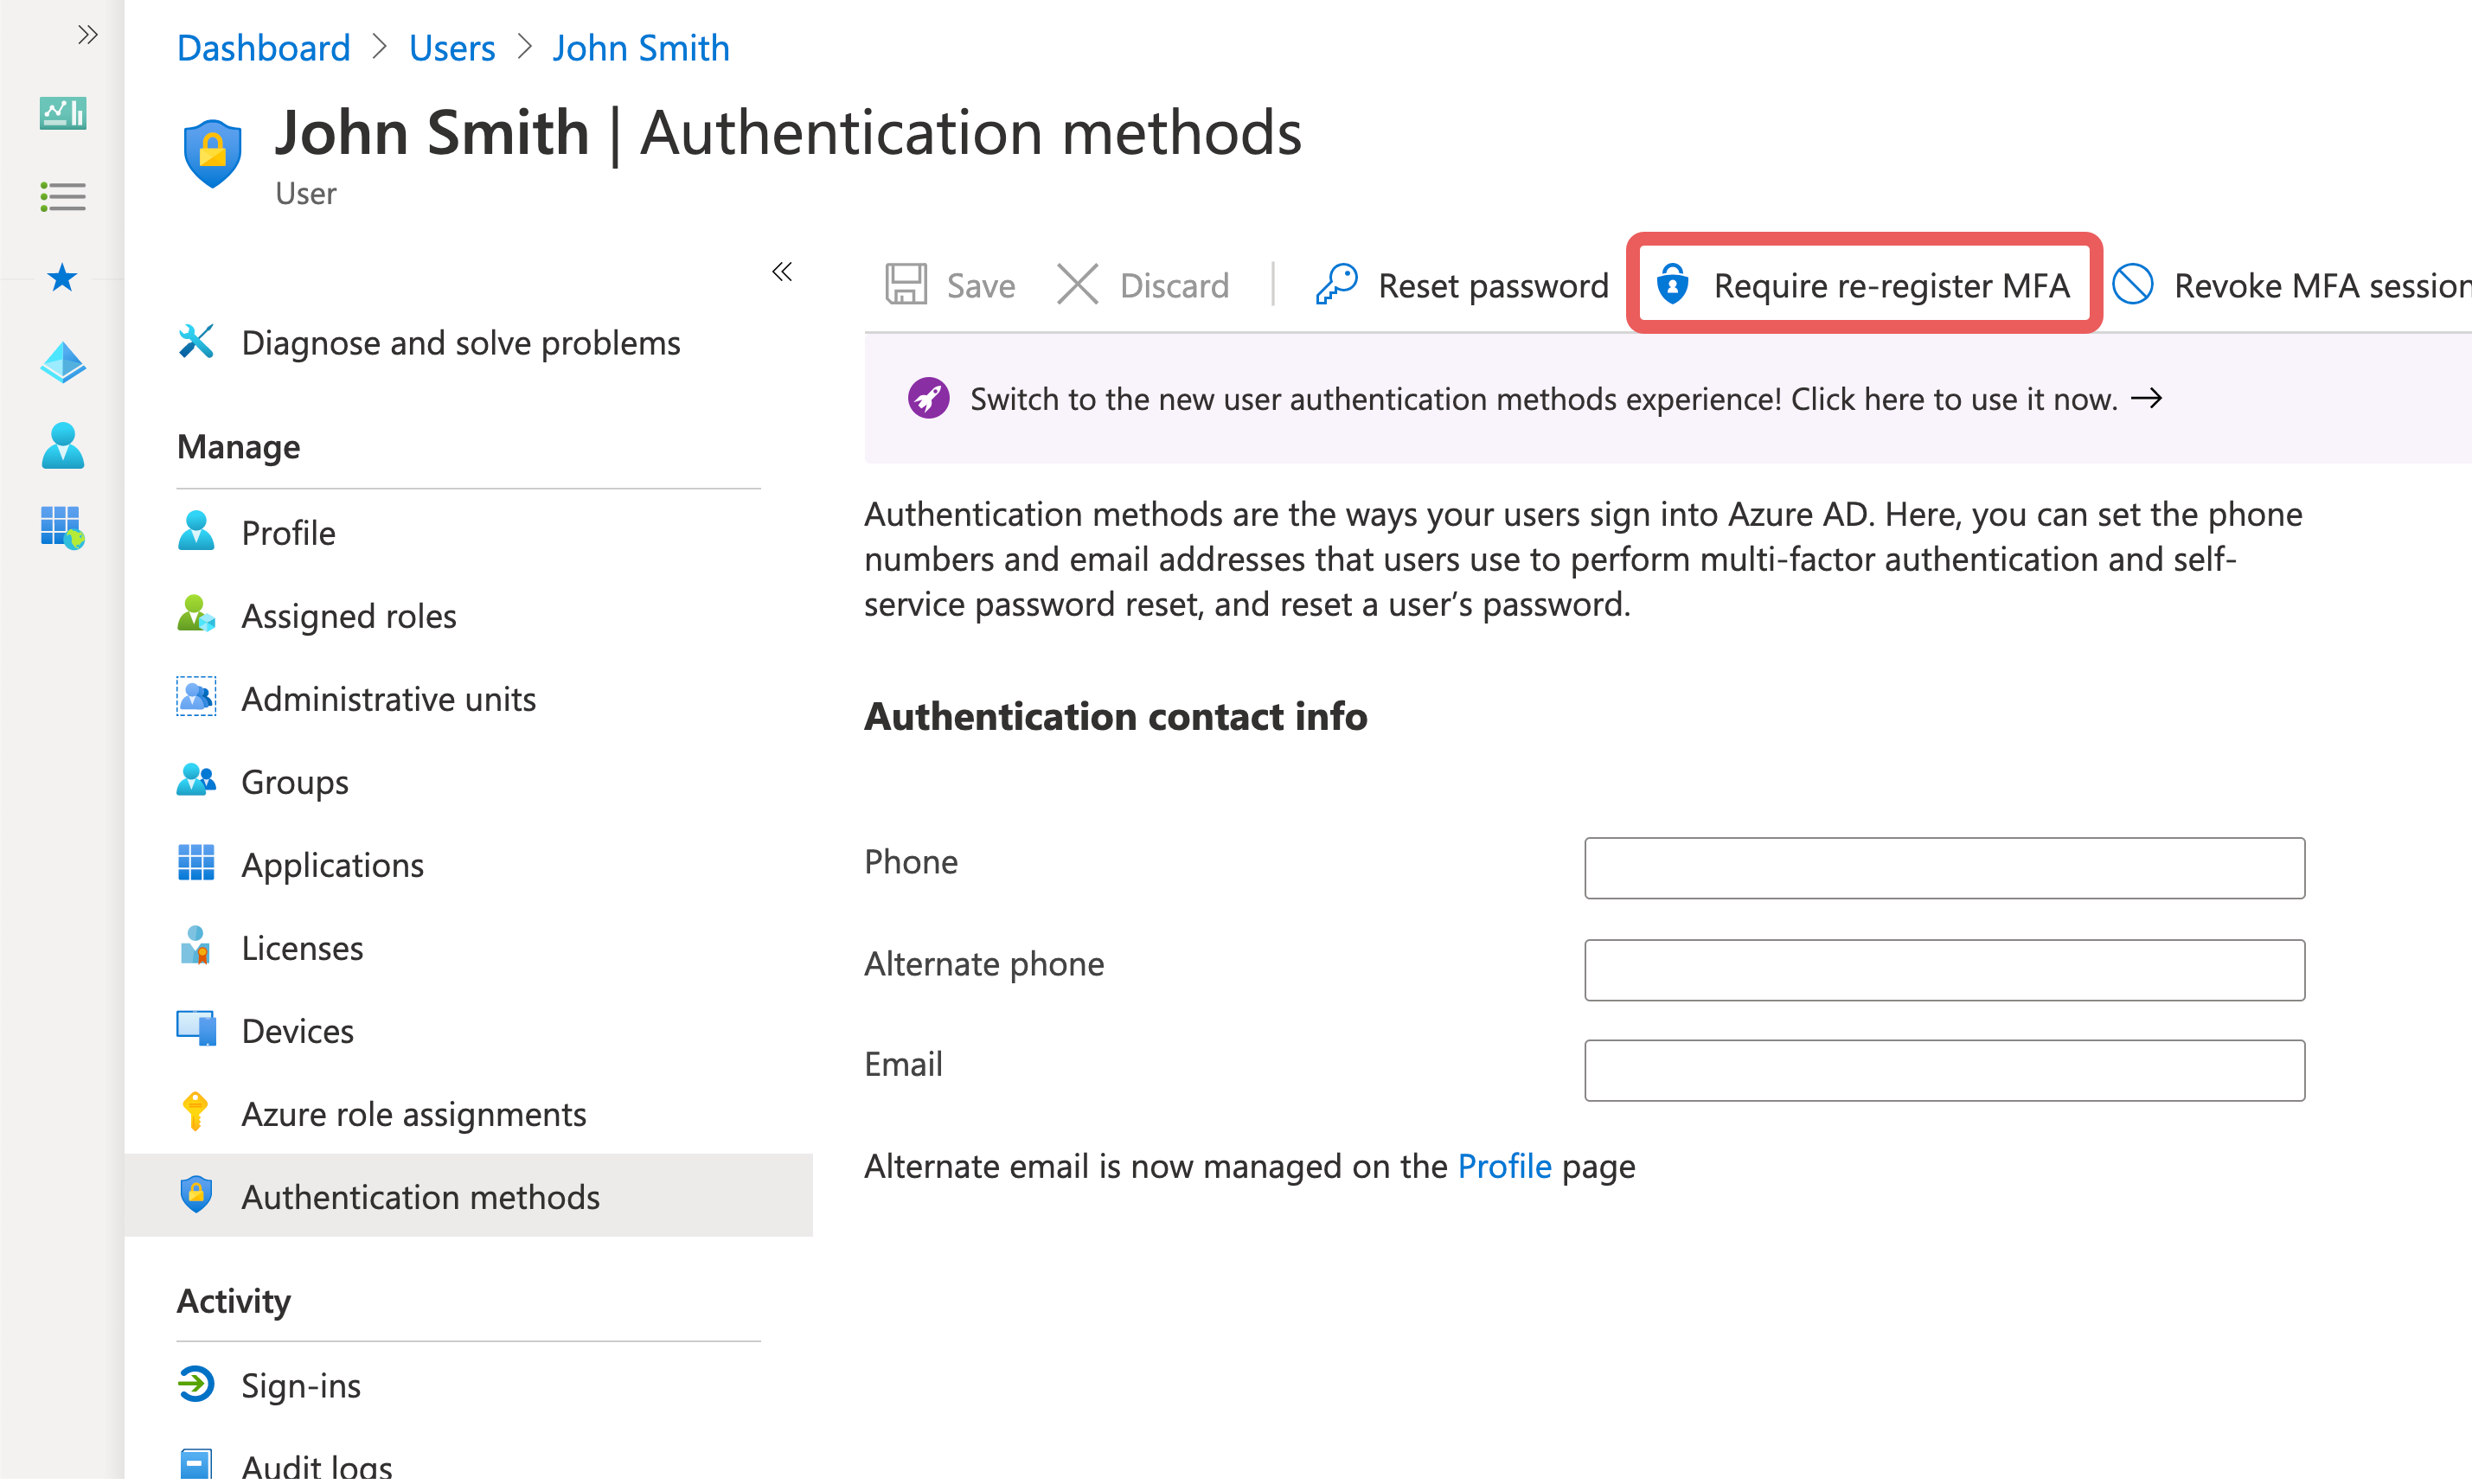 M365: Users, Authentication methods, Require re-register MFA